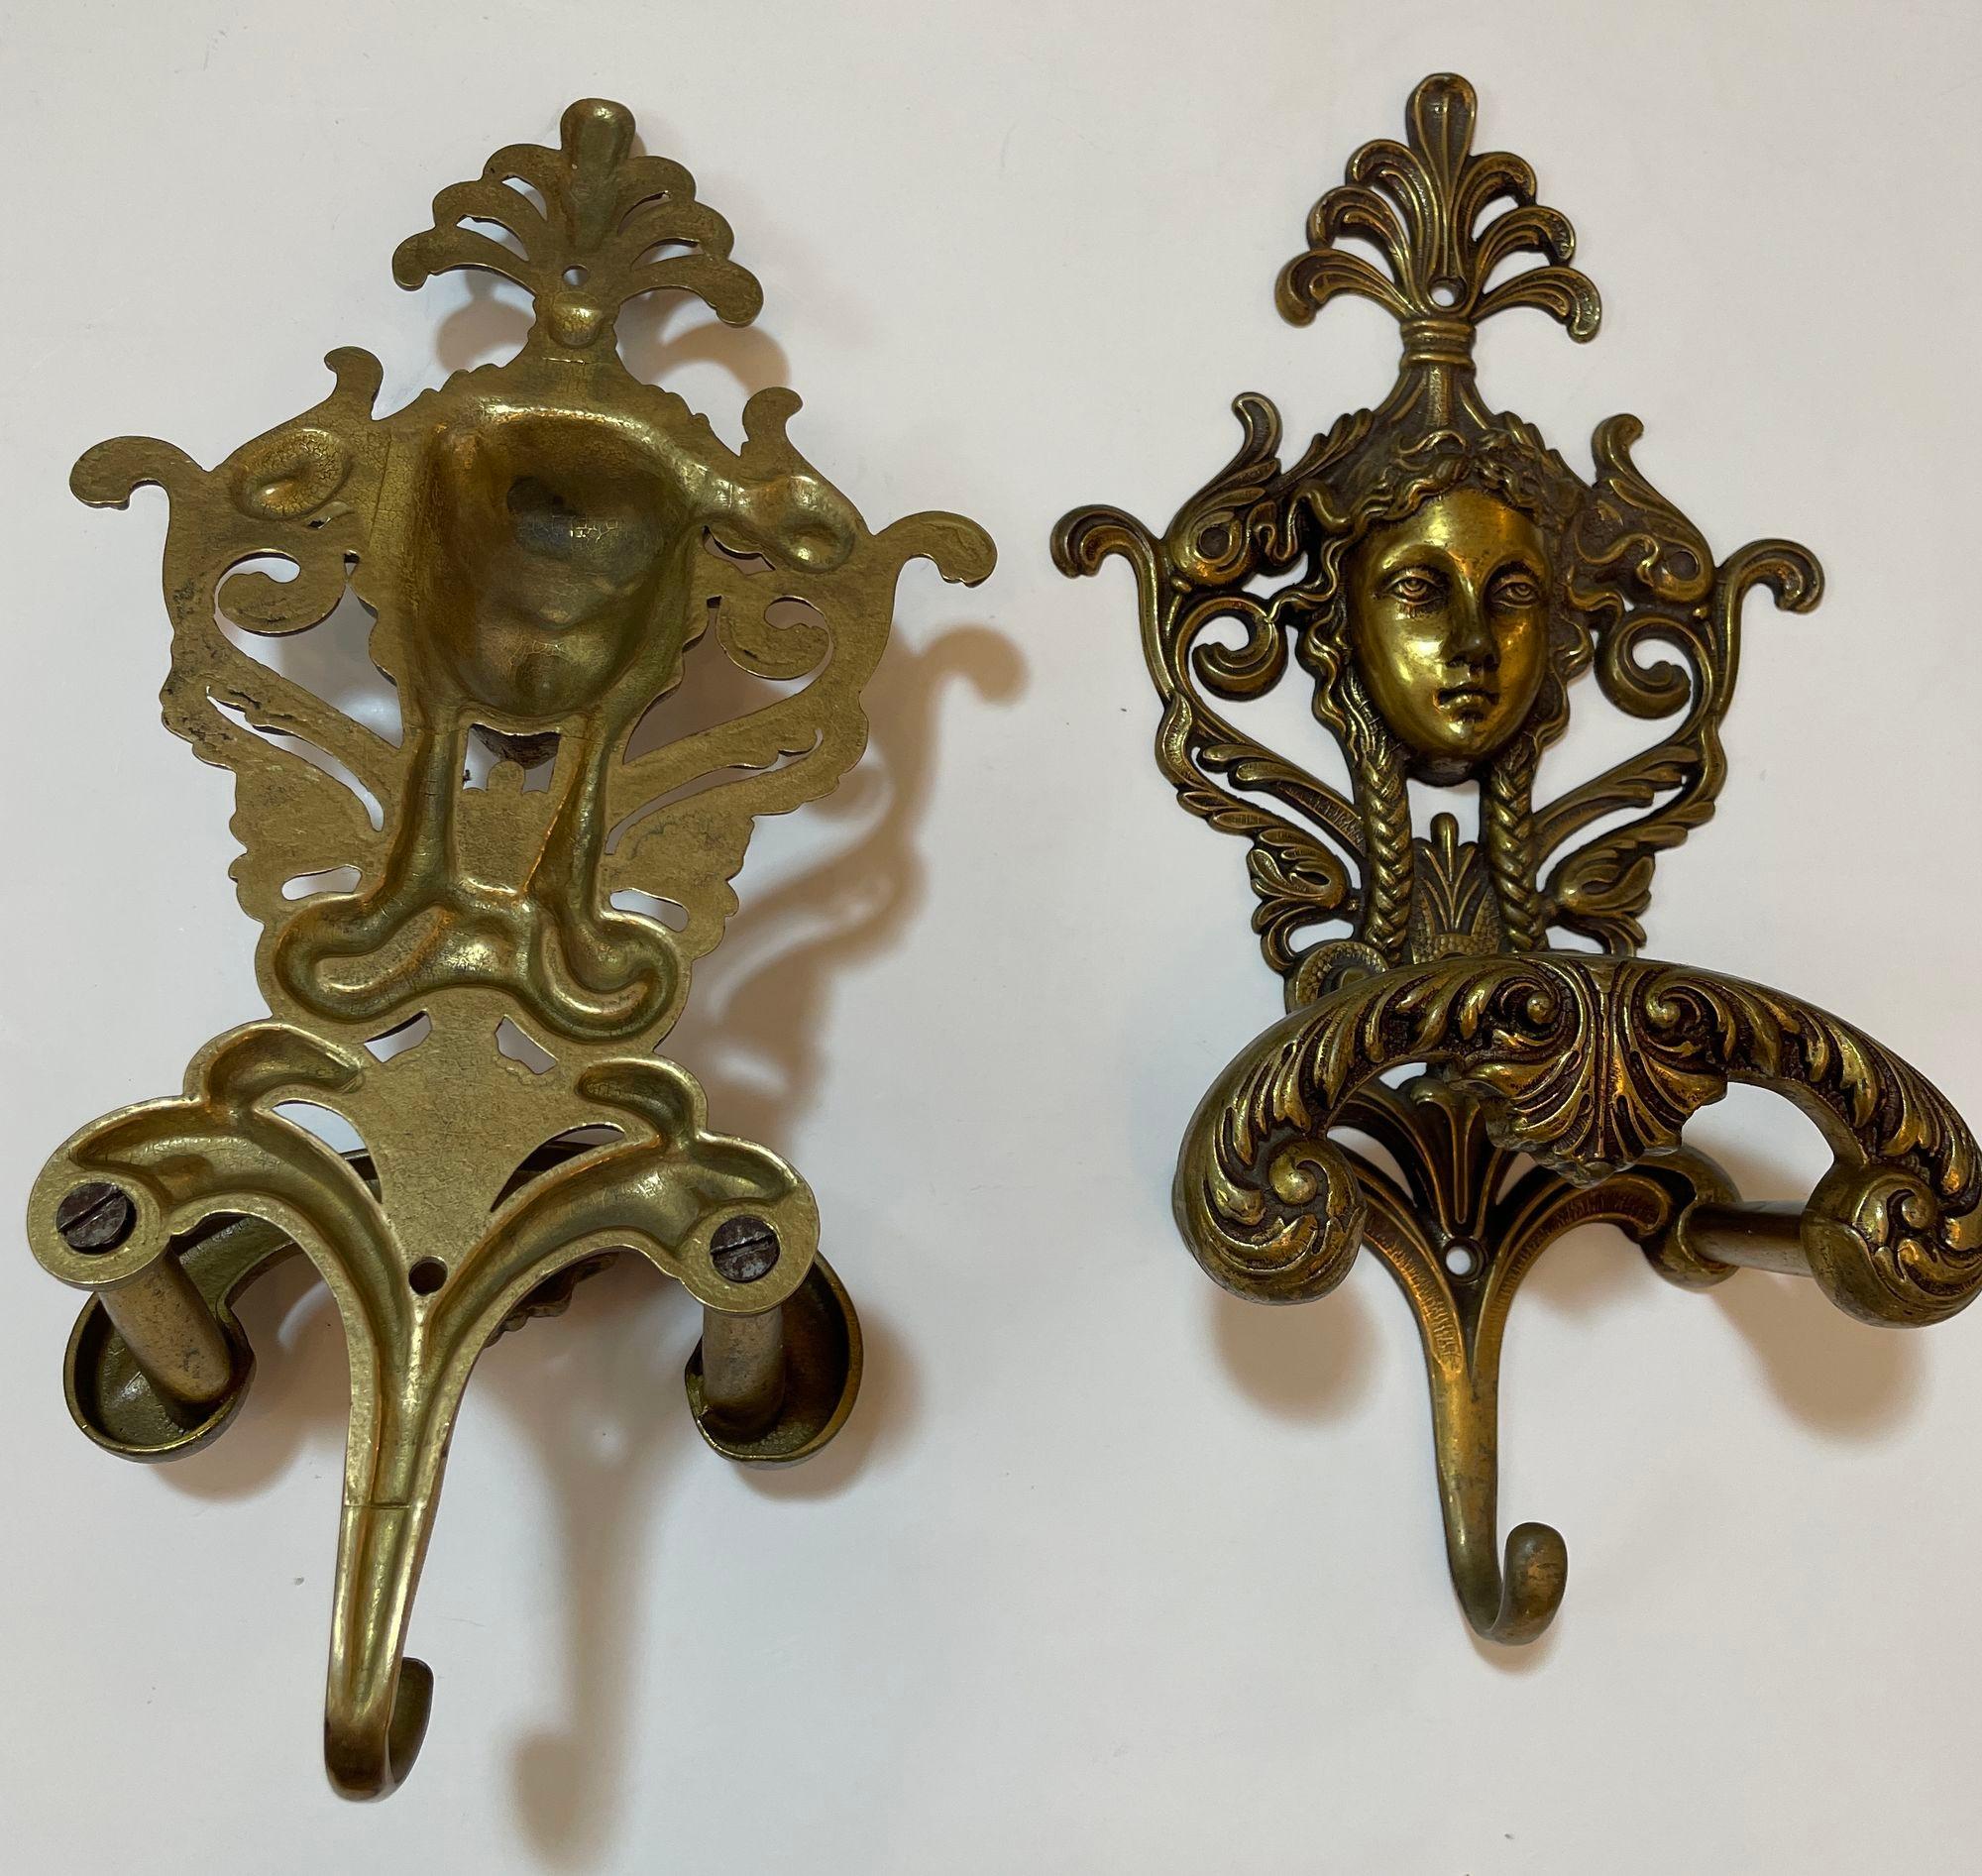 20th Century Antique Ornate Italian Figural Architectural Cast Brass Wall Hook Decor Set of 3 For Sale